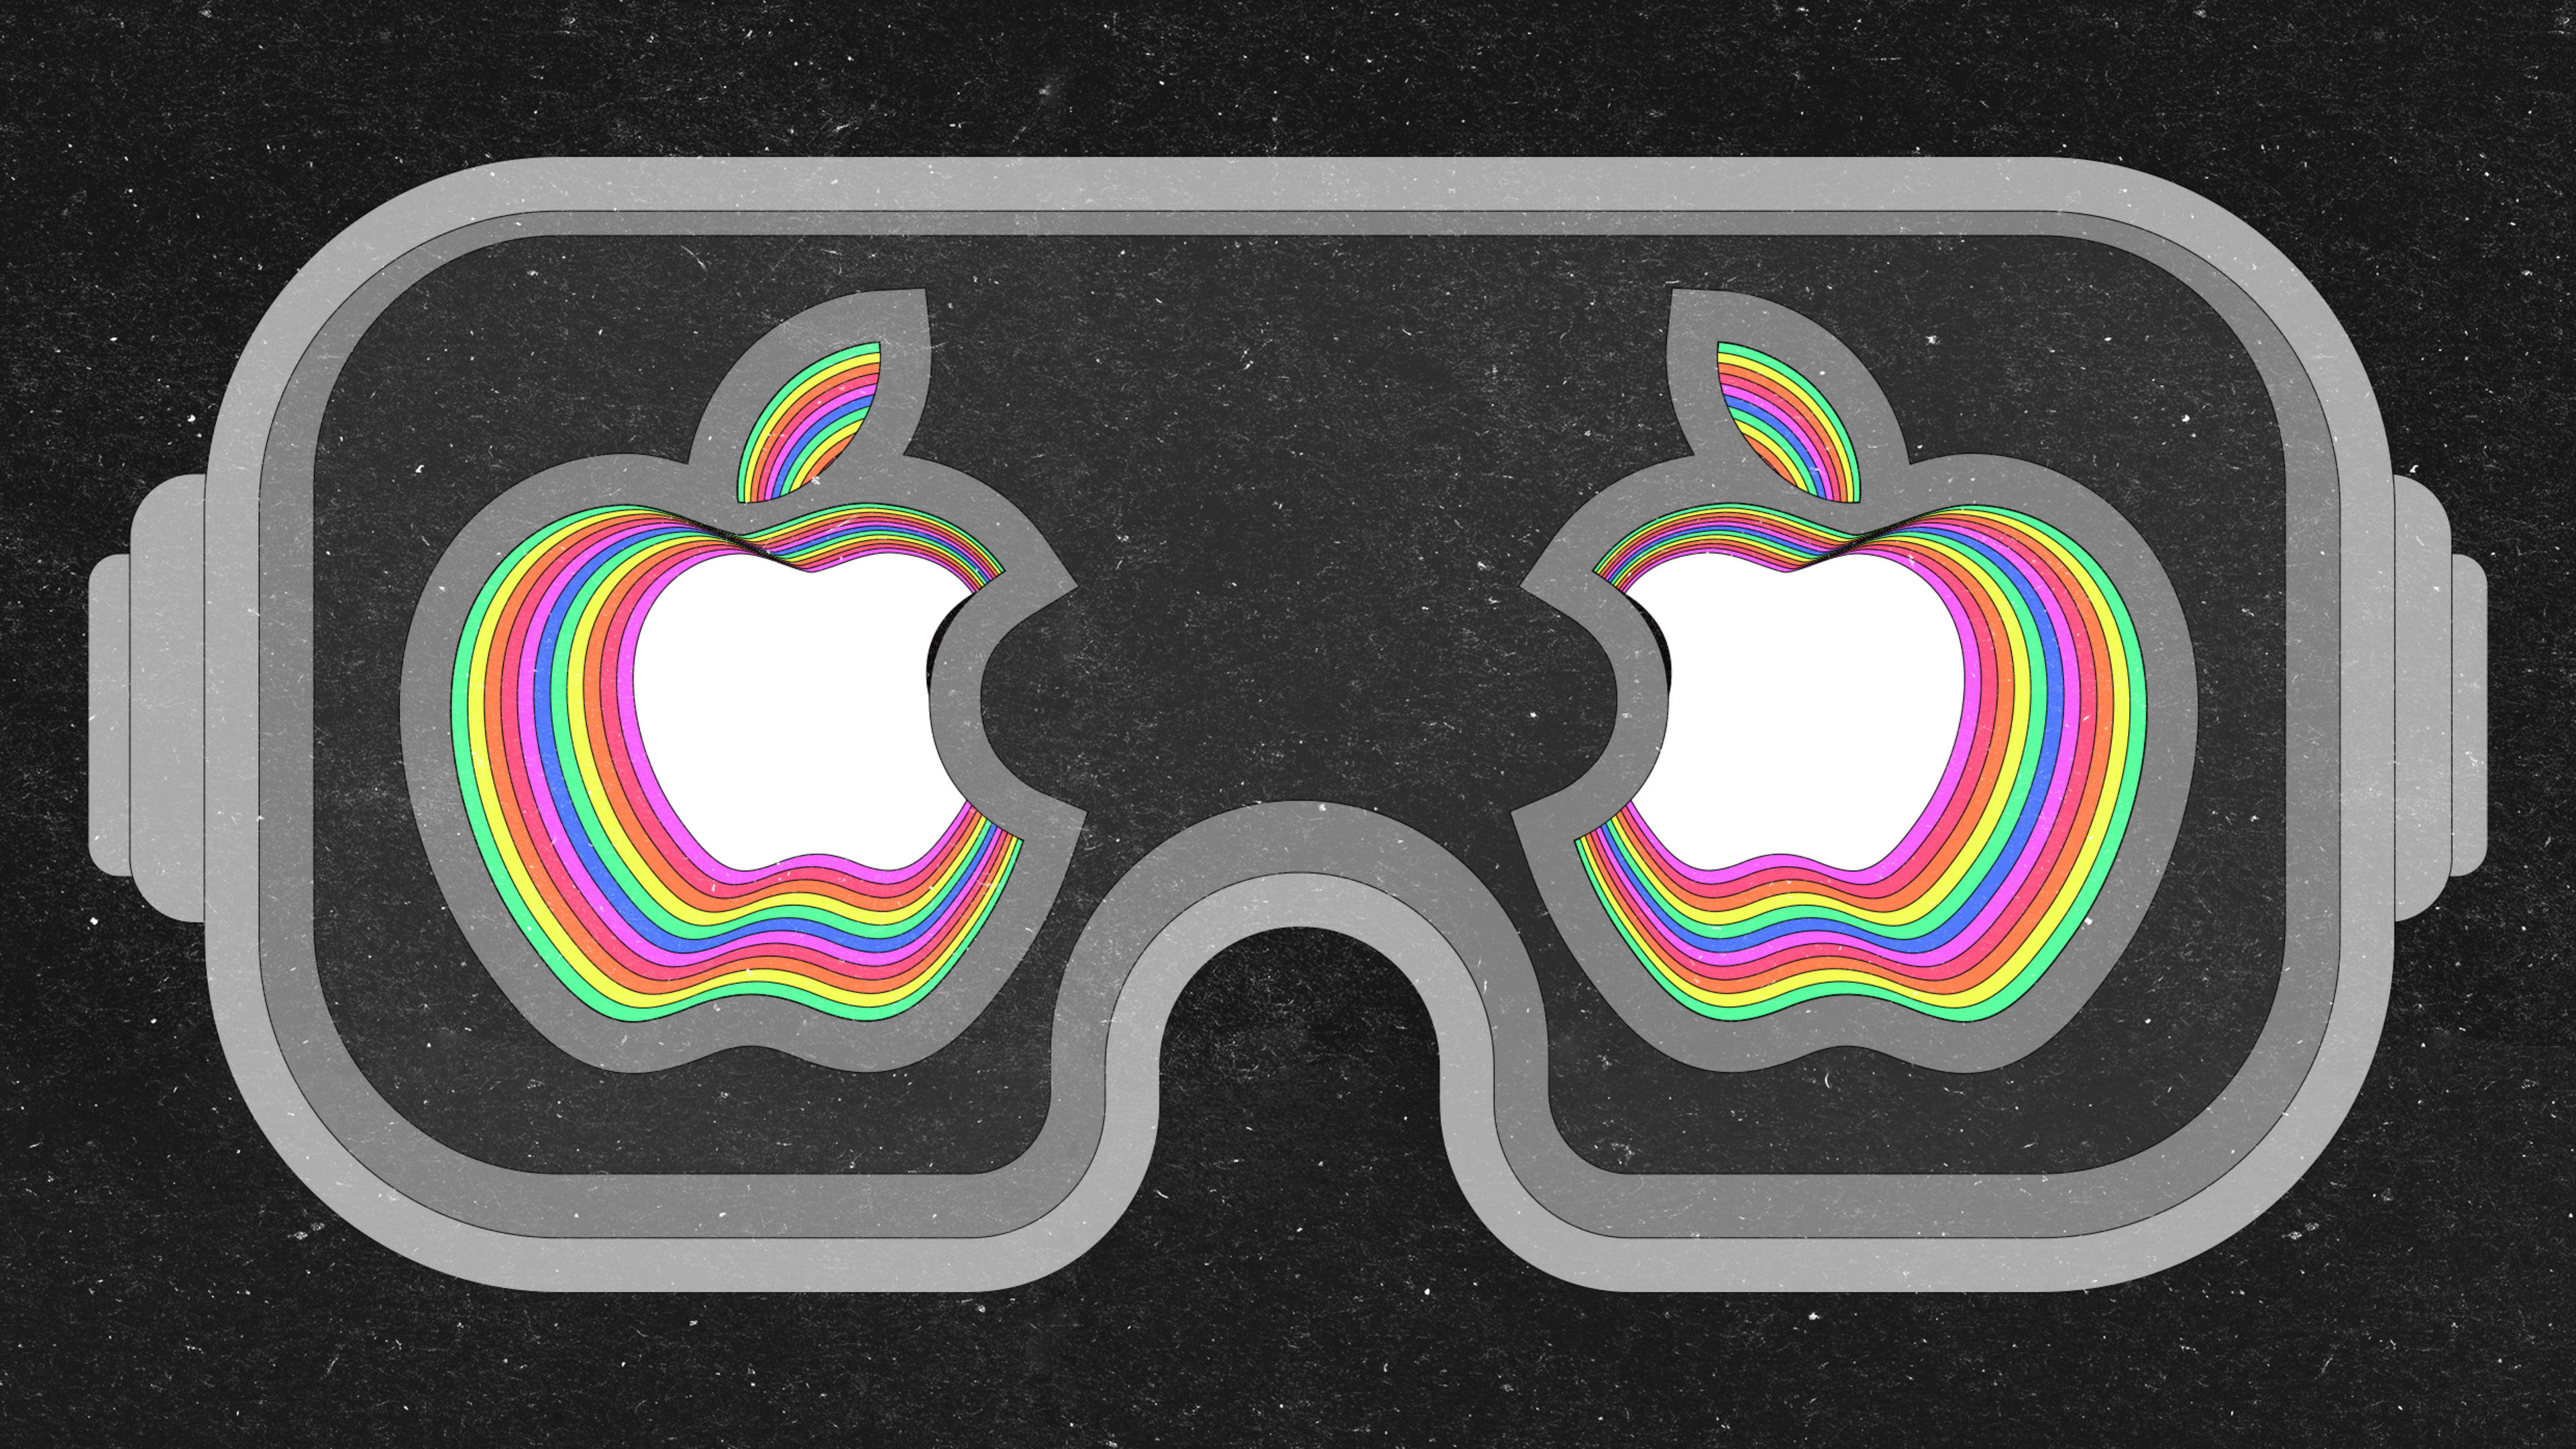 Why Apple’s secrecy about its metaverse plans is looking smarter every day